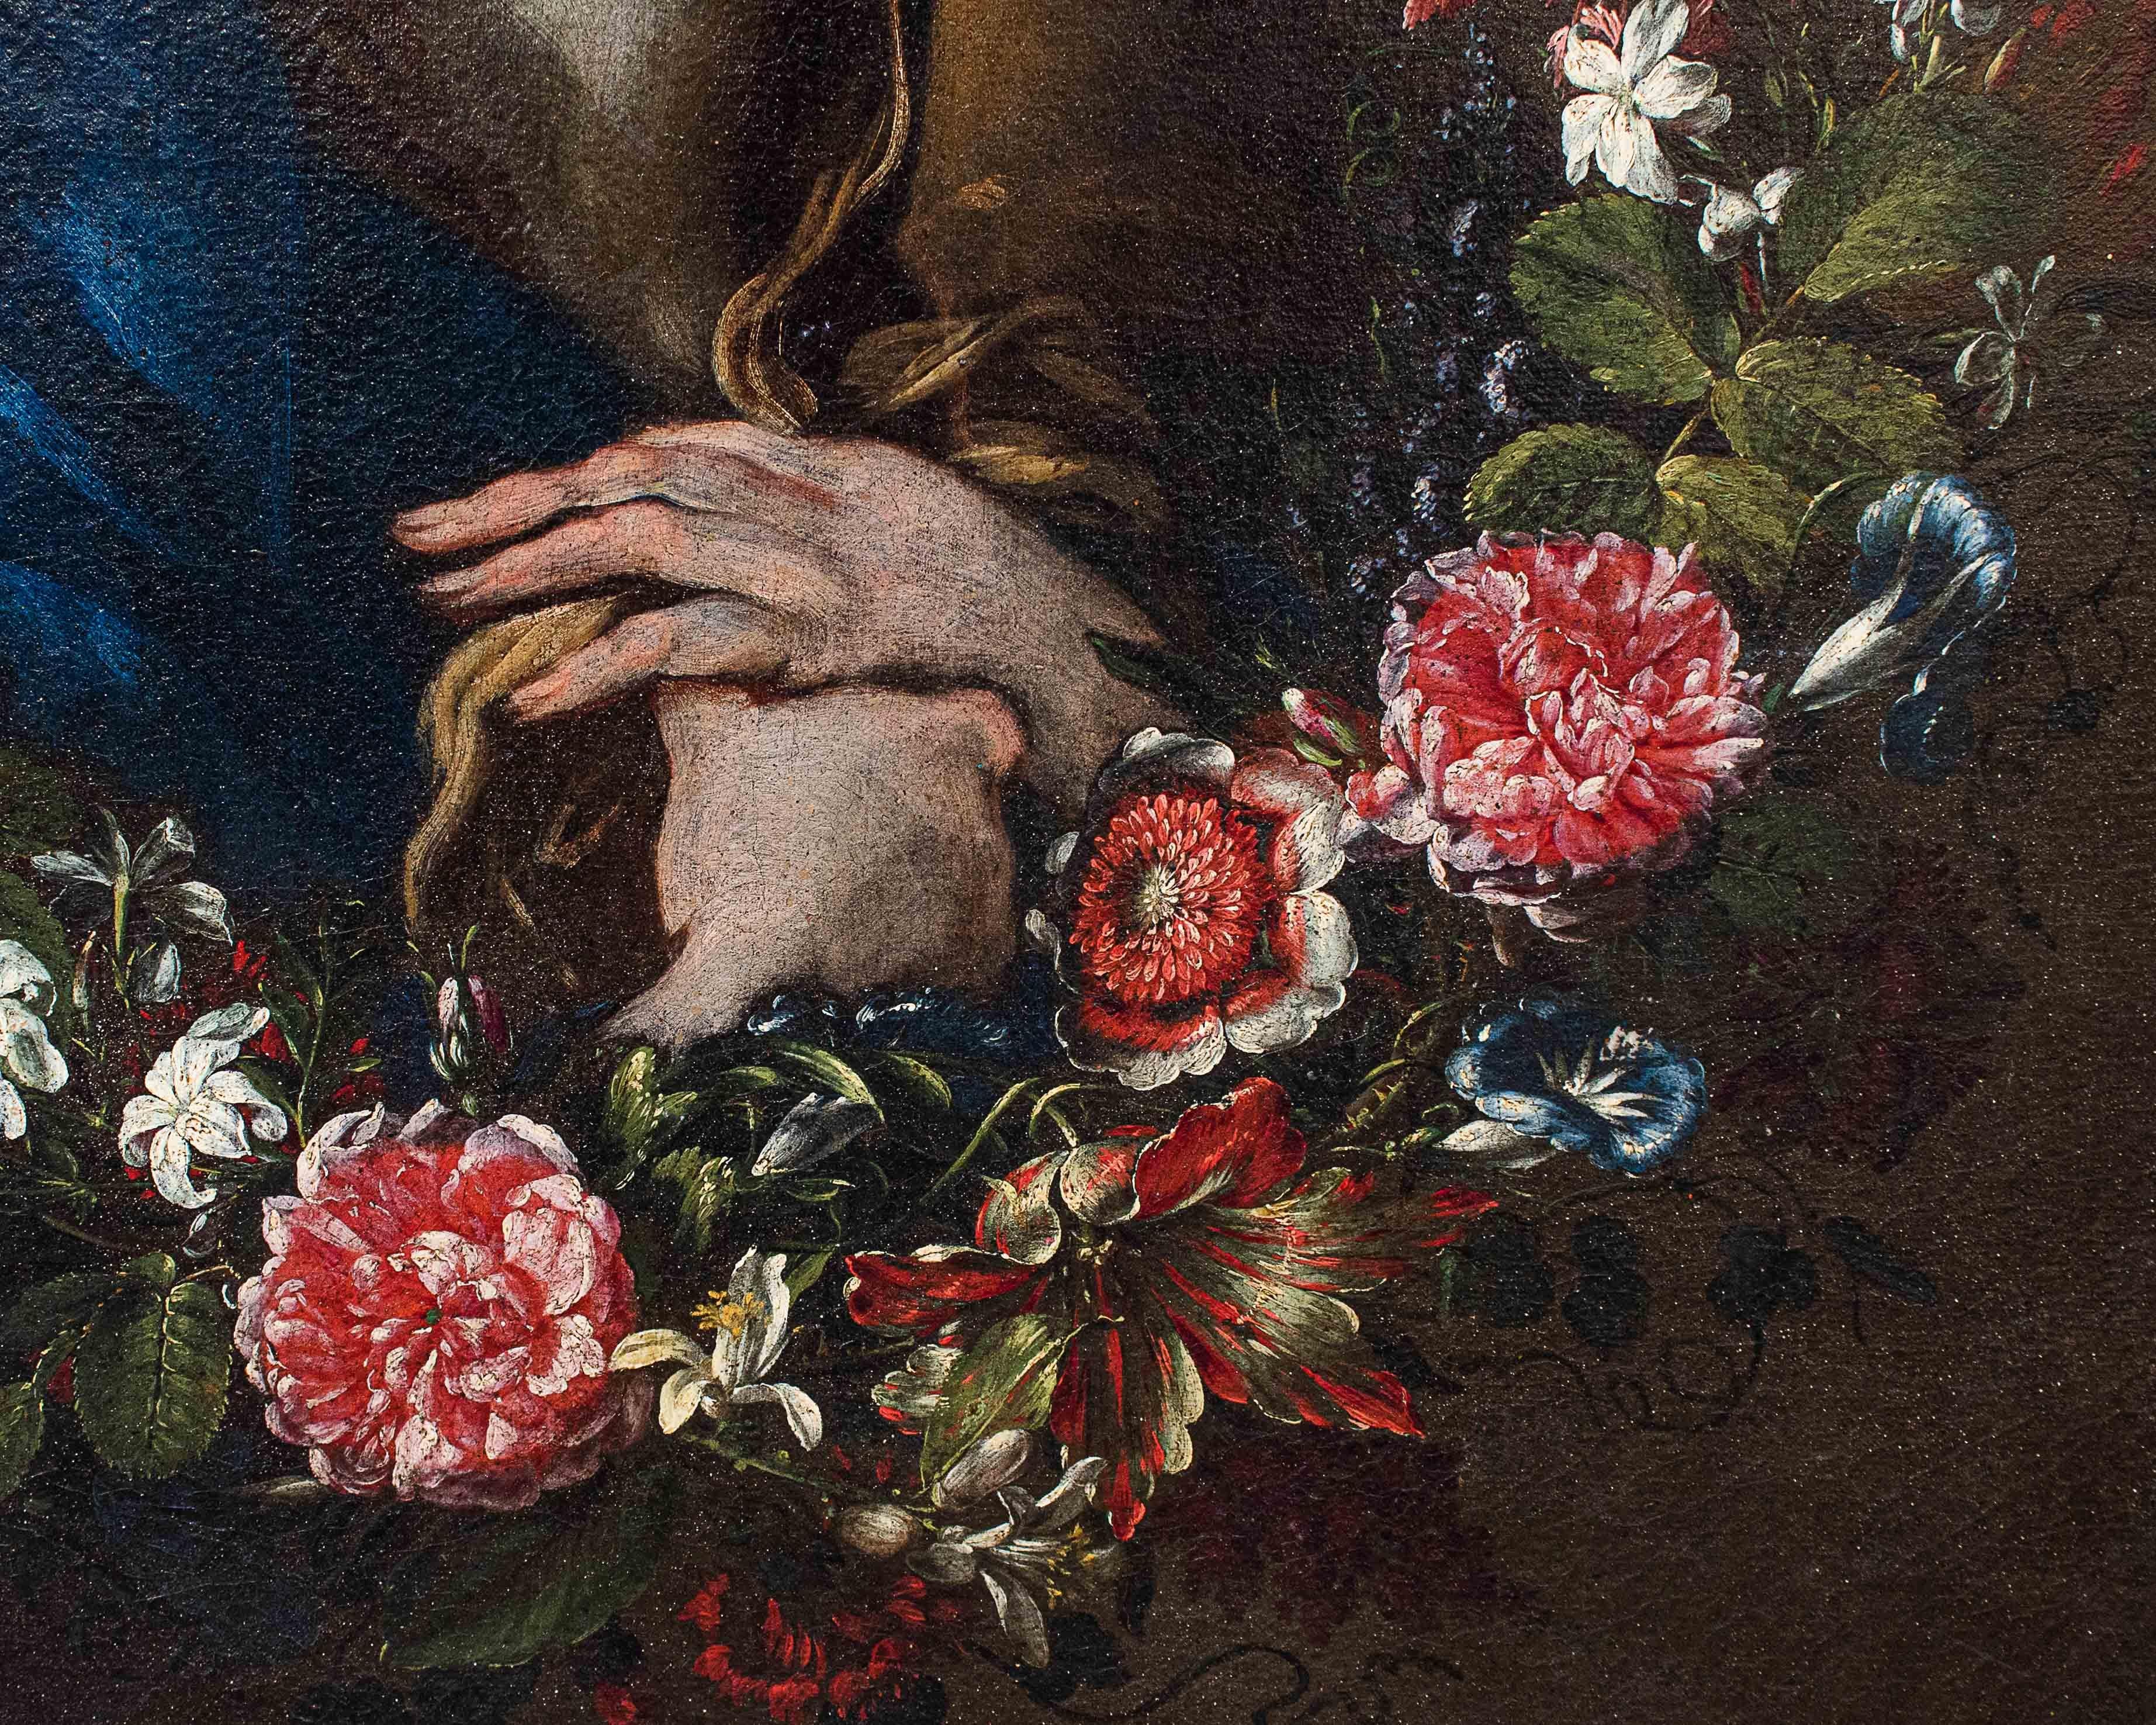 17th-18th Century Virgin with in Garland of Flowers Painting Oil on Canvas 6